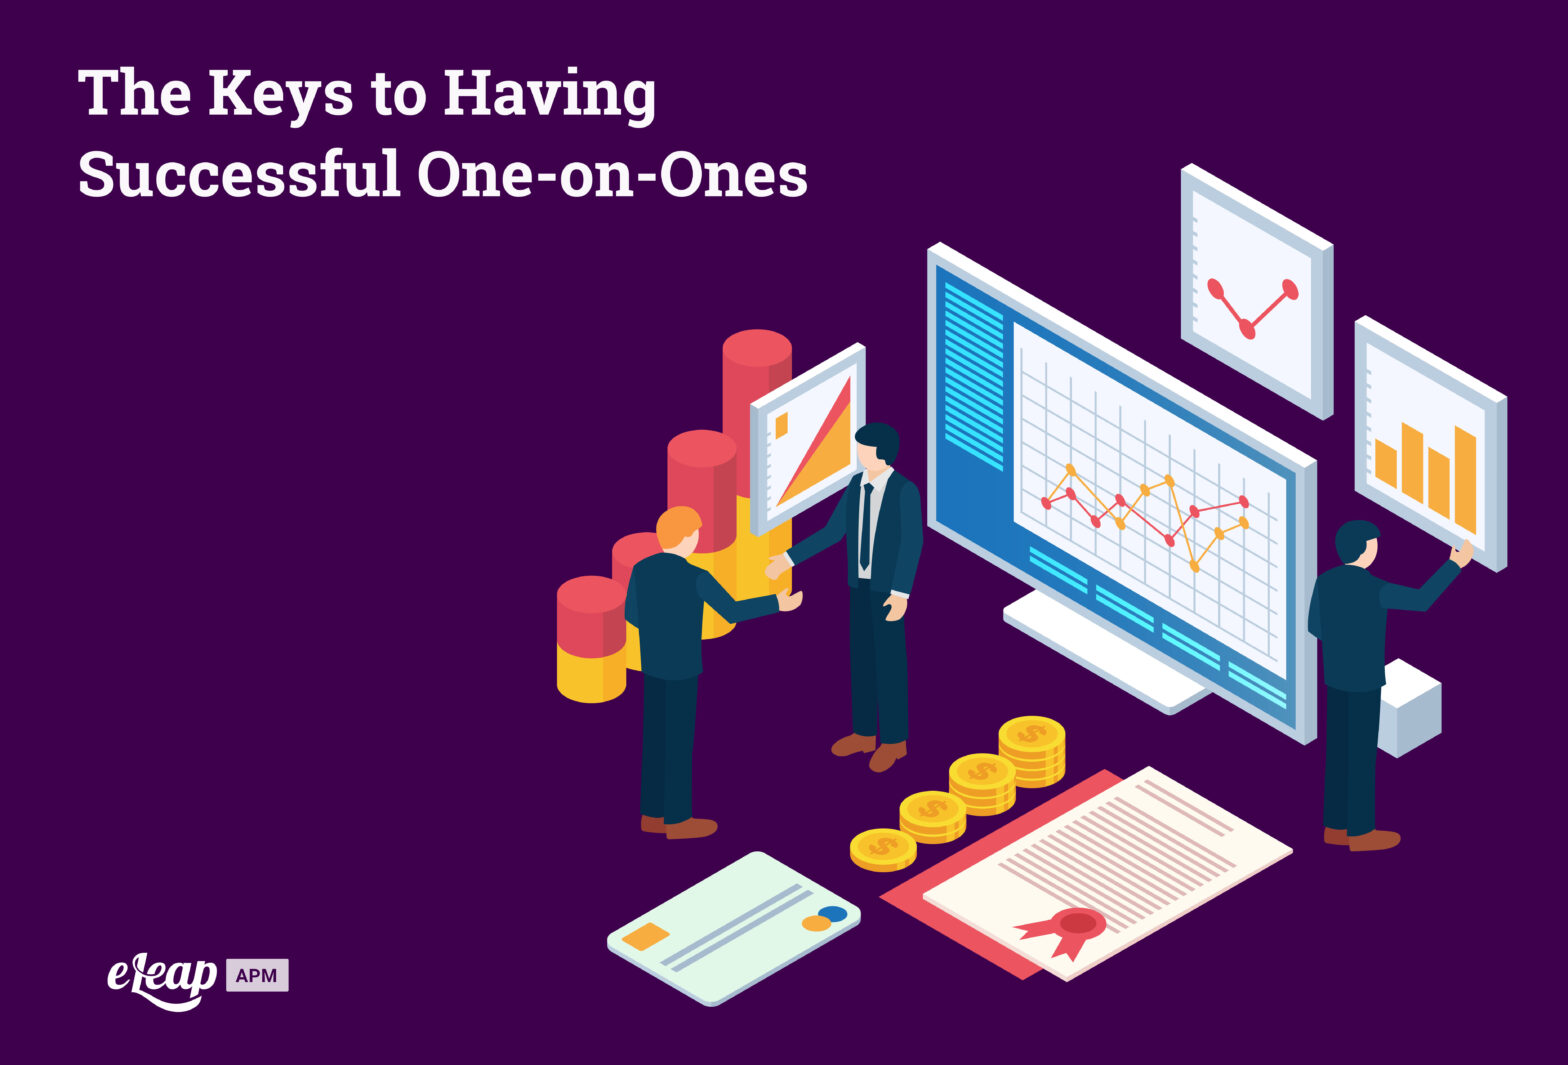 The Keys to Having Successful One-on-Ones